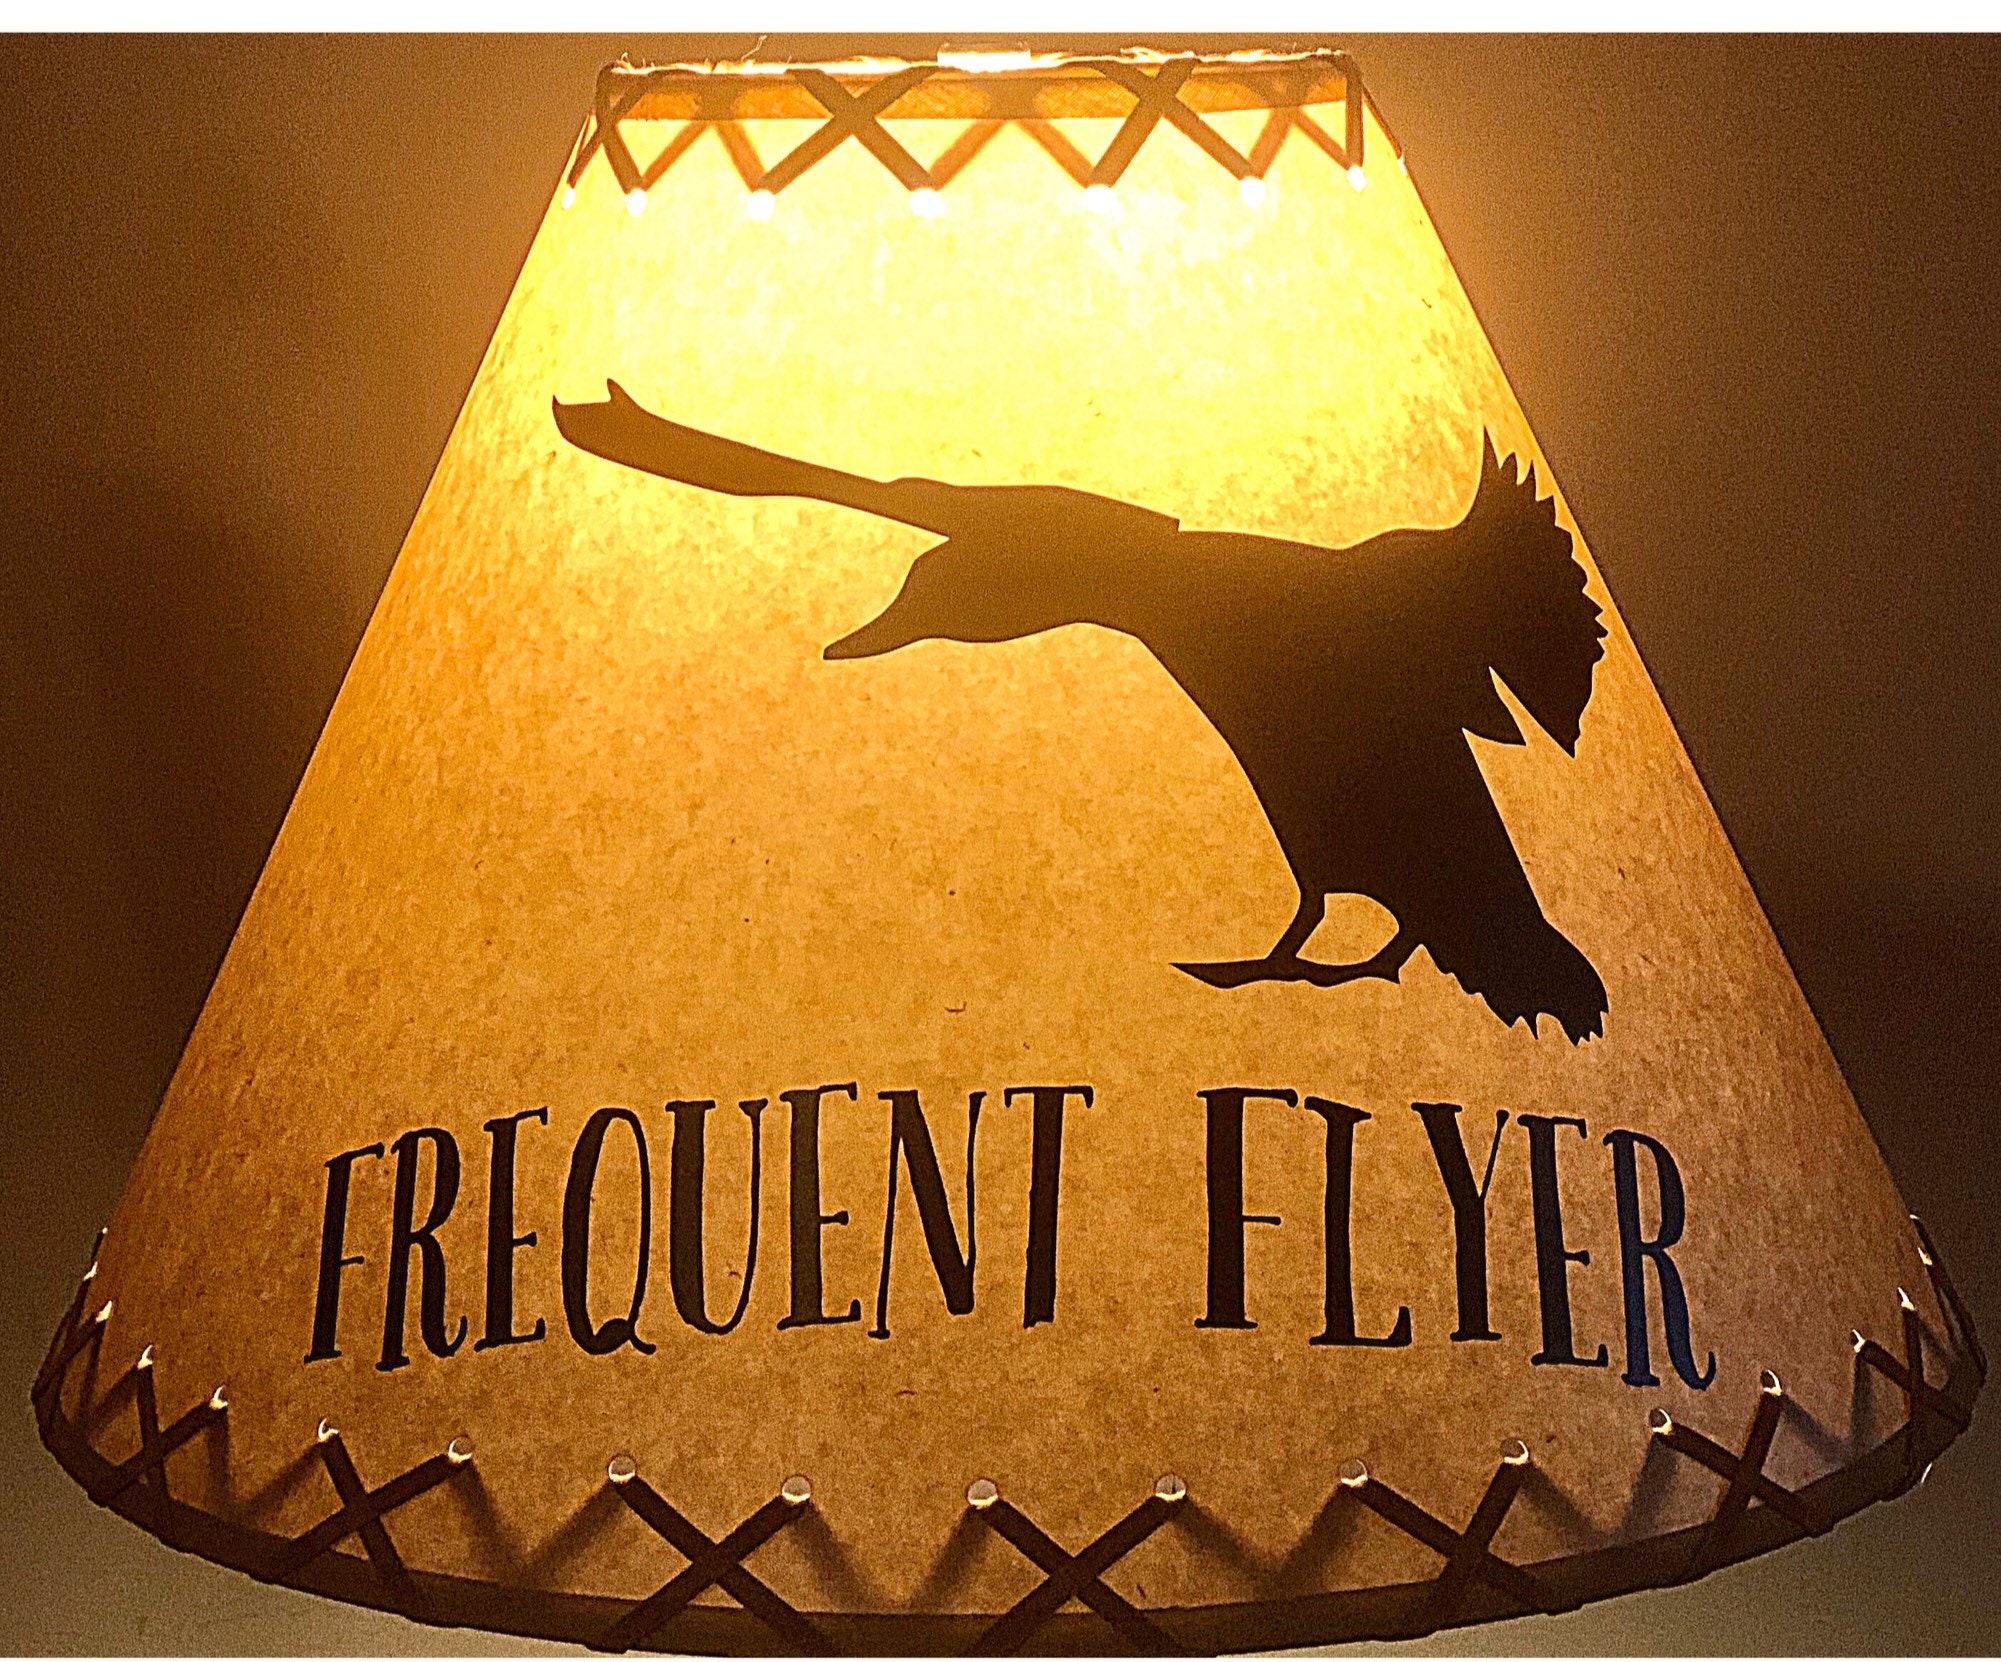 Frequent Flyer Lamp Shade, Rustic Lamp Shade, Lodge Decor, Cabin Decor,  Cabin Lamp Shade, 14 